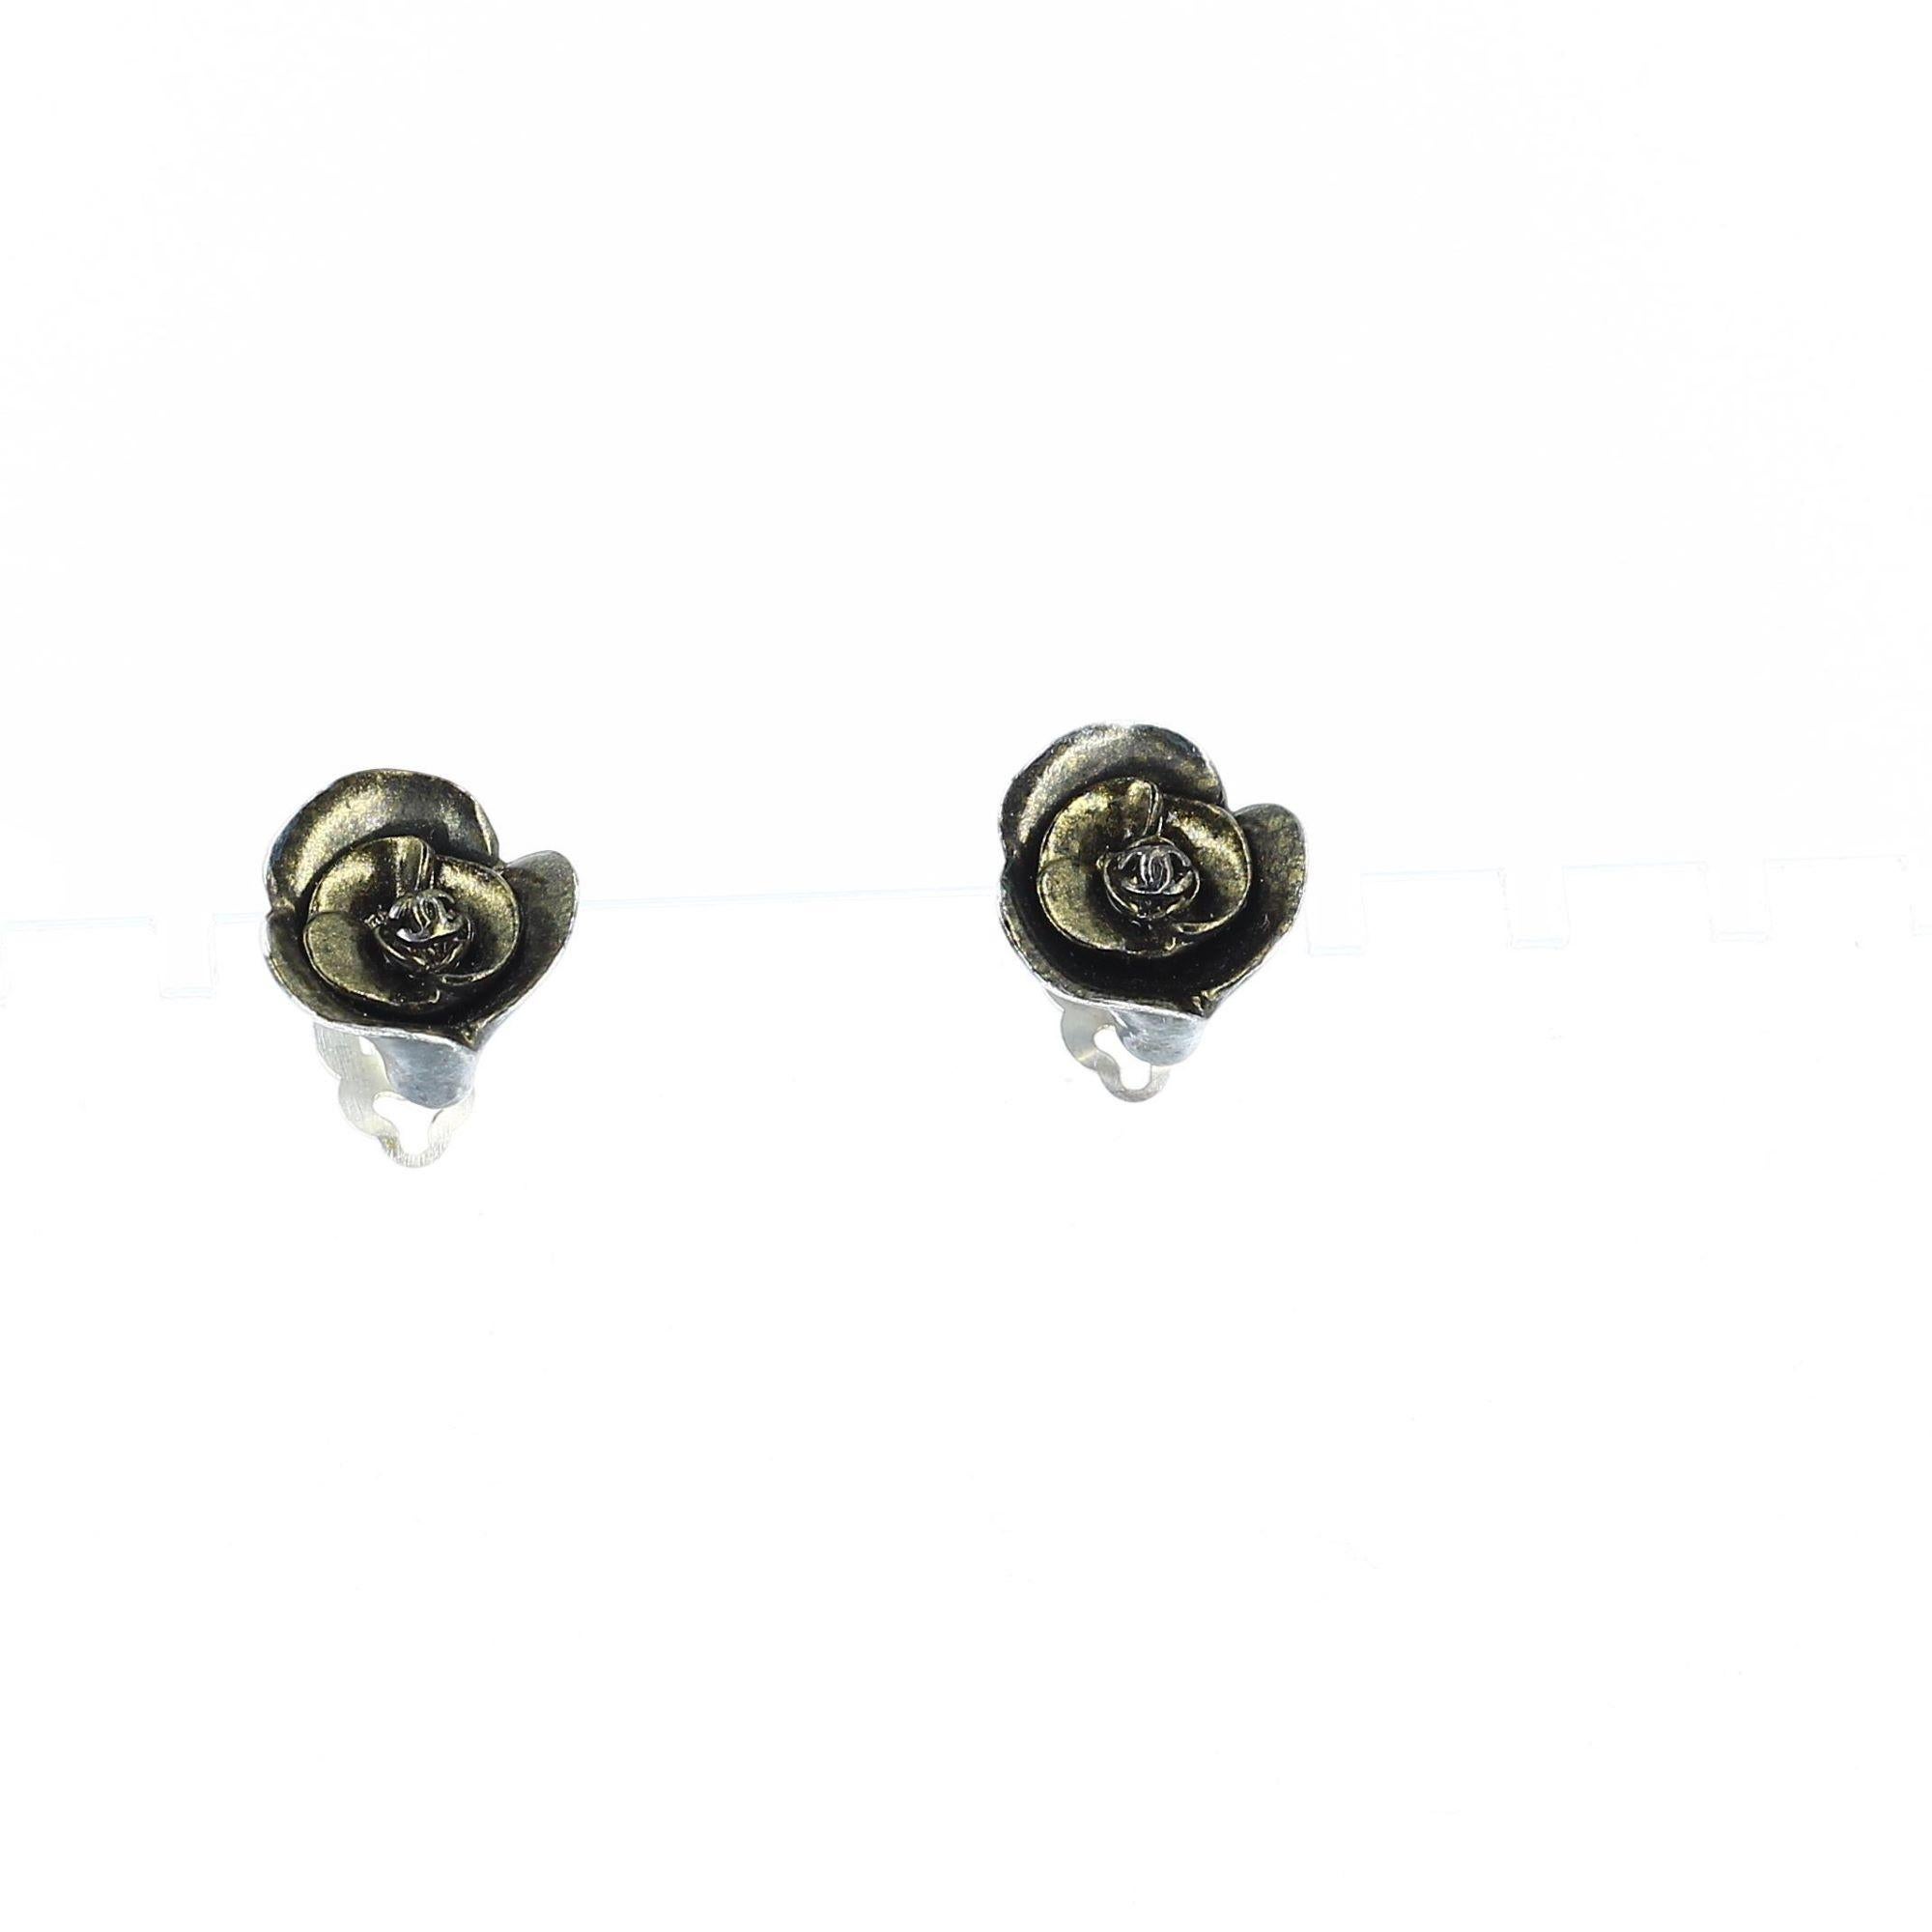 Chanel Camelia's earrings

Very good condition show some light signs of use and wear but nothing visible. A beautiful piece to add in your closet.
Camelia's earings with a double C in the middle !
Silver metal hardware earrings
Packaging : Opulence